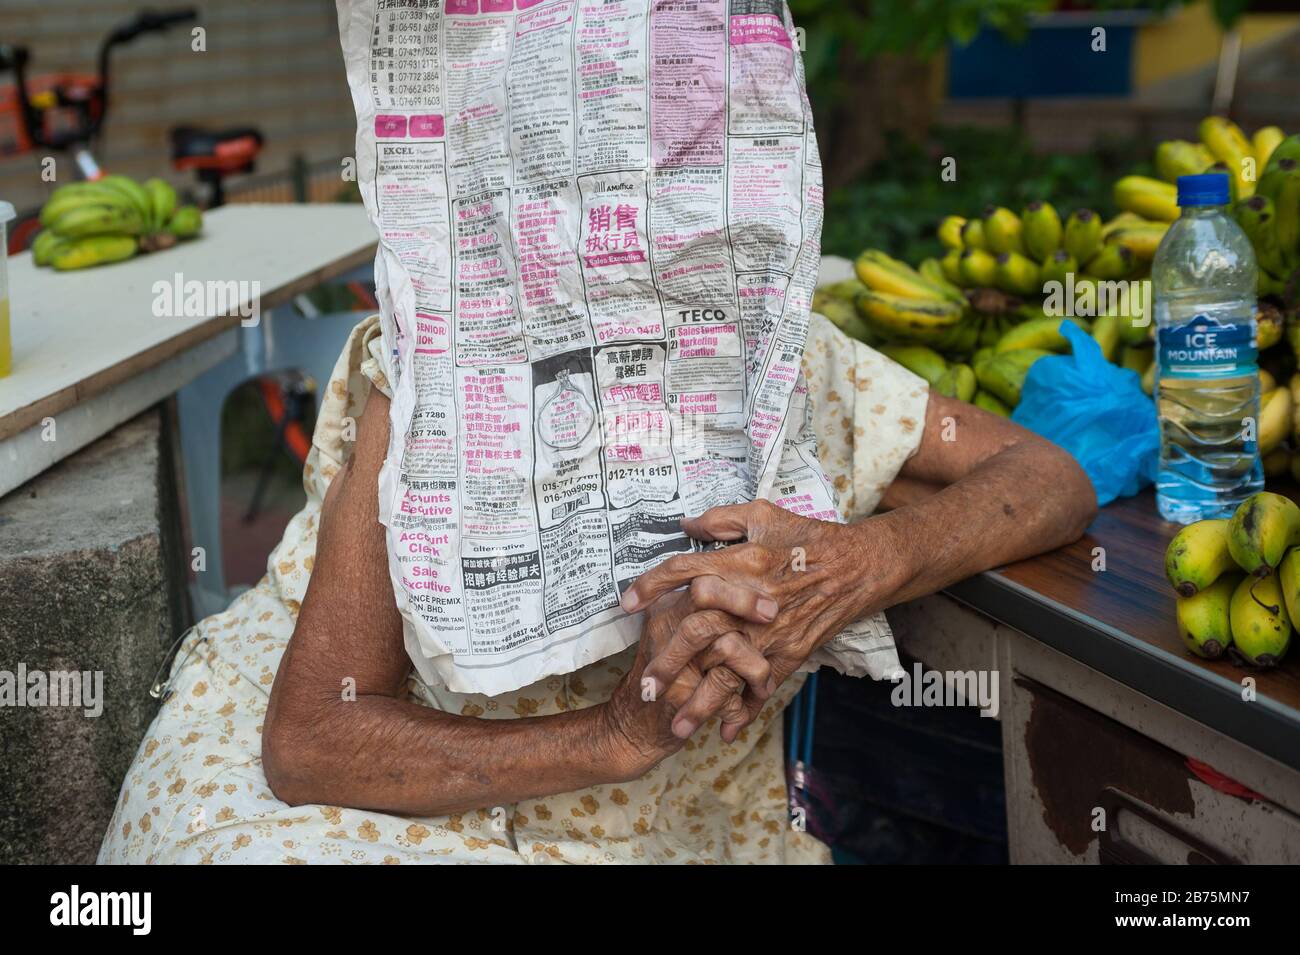 03.11.2017, Singapore, Republic of Singapore, Asia - An old woman selling bananas in Singapore's Chinatown district is hiding behind a newspaper. [automated translation] Stock Photo